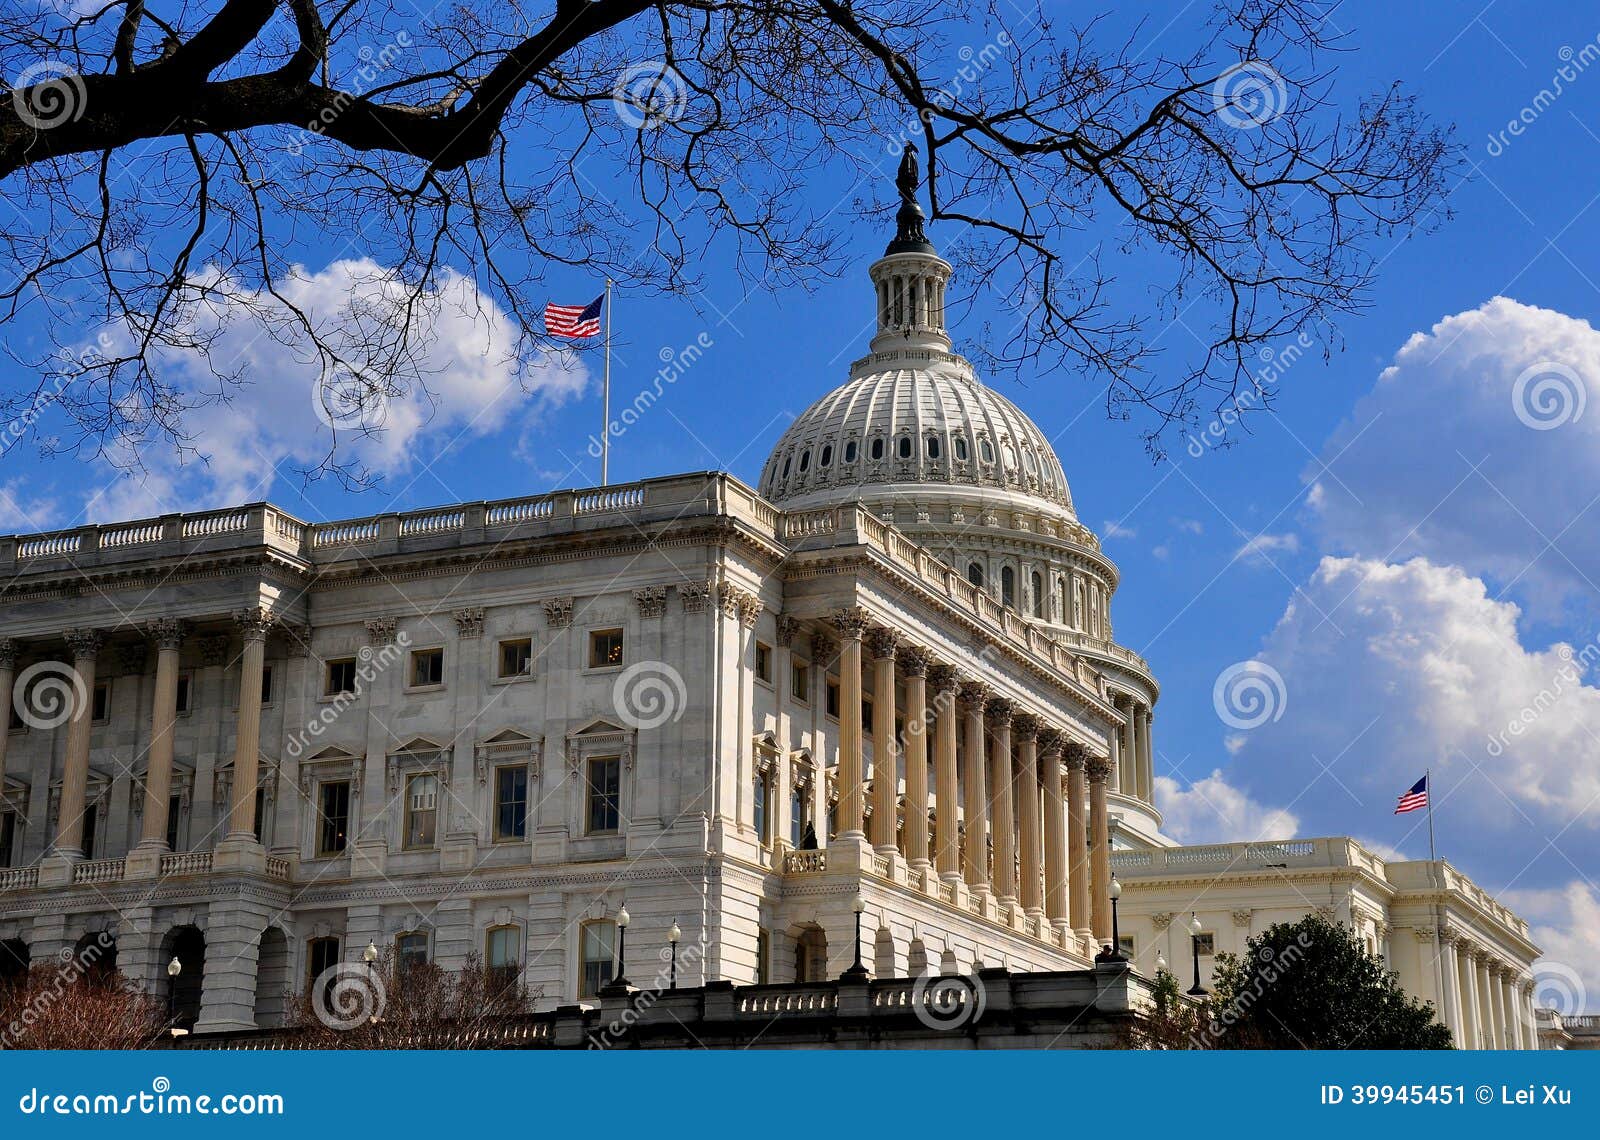 Washington, DC: West Front of U. S. Capitol. Washington, DC: The Senate wing and great dome of the United States Capitol s west front *